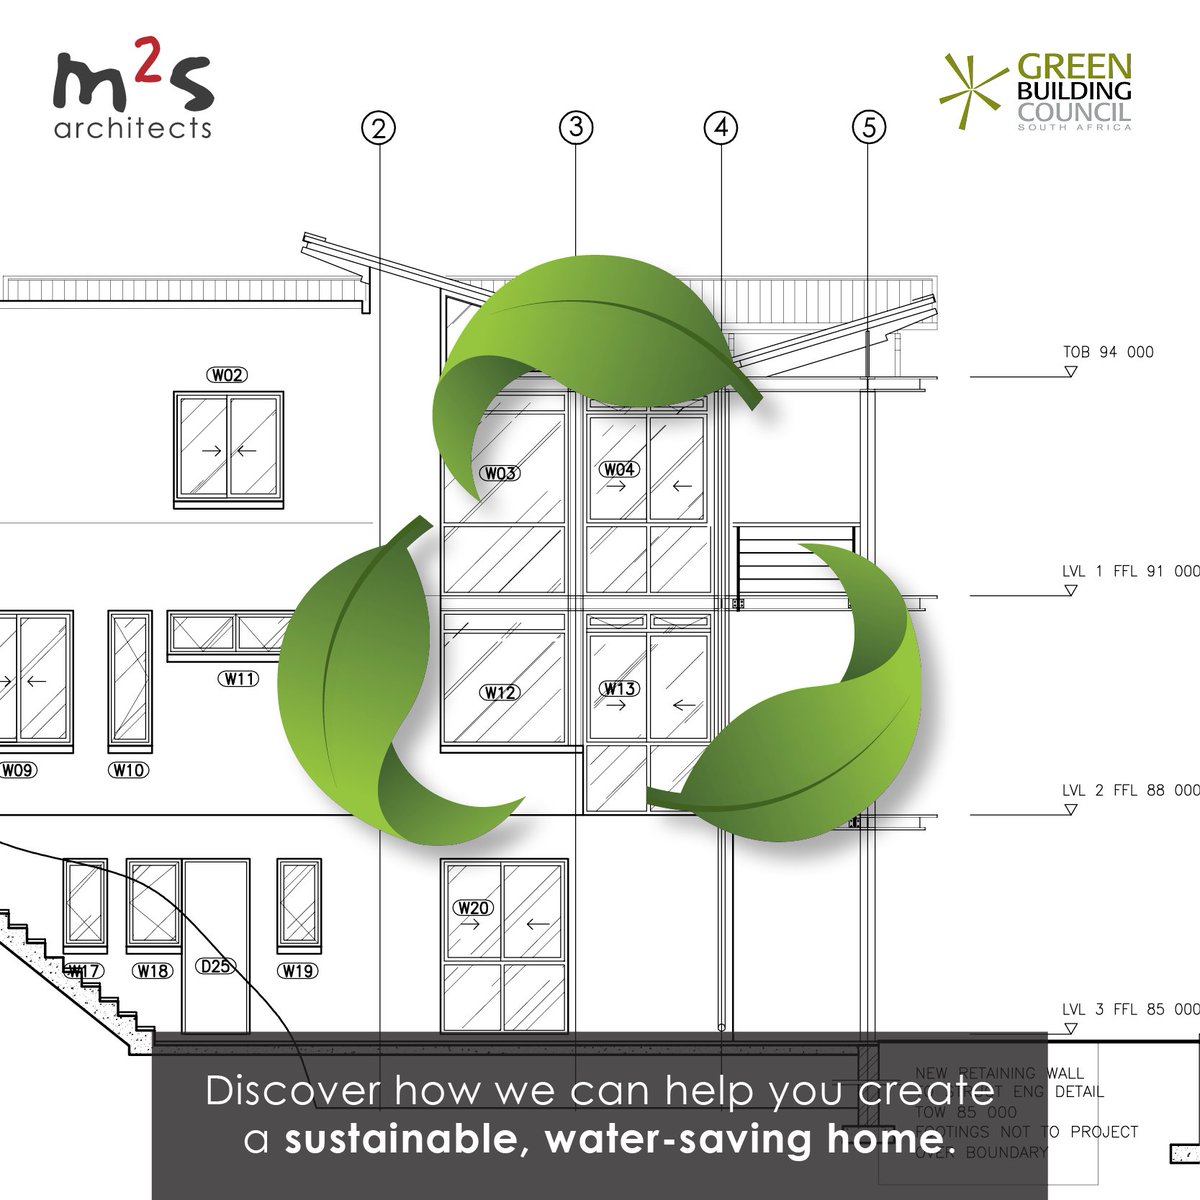 At M2S Architects we can help you create a sustainable water-saving home. For cost-efficient, long-term eco-friendly solutions contact us today: m2sarchitects.co.za #waterwise #drought #westerncape